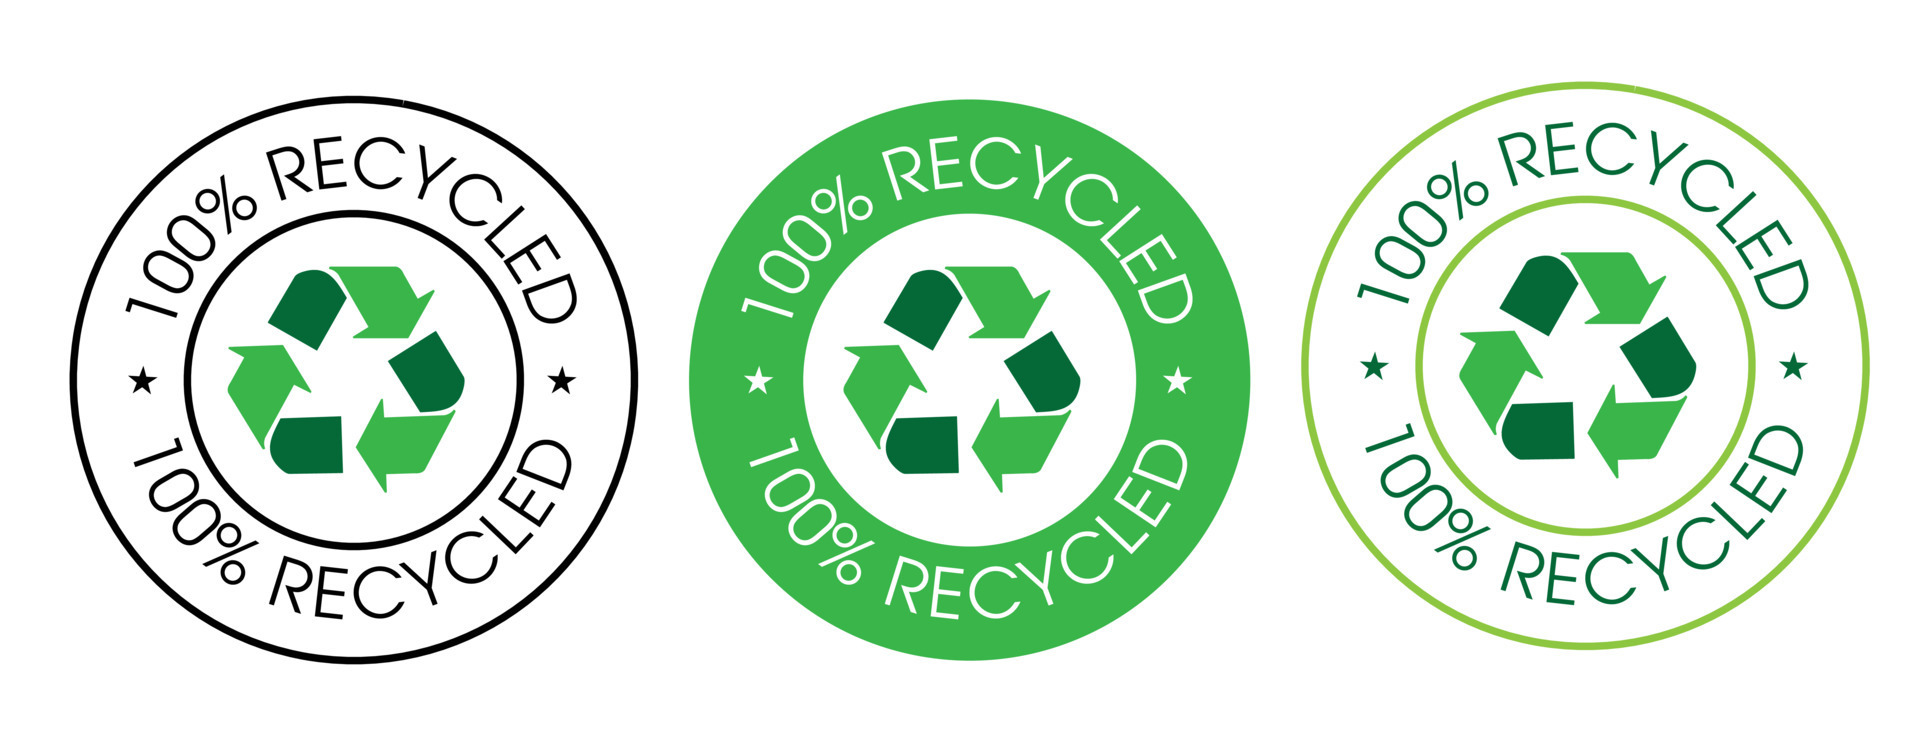 100 percent recycled vector icon set, green in color 22127209 Vector ...